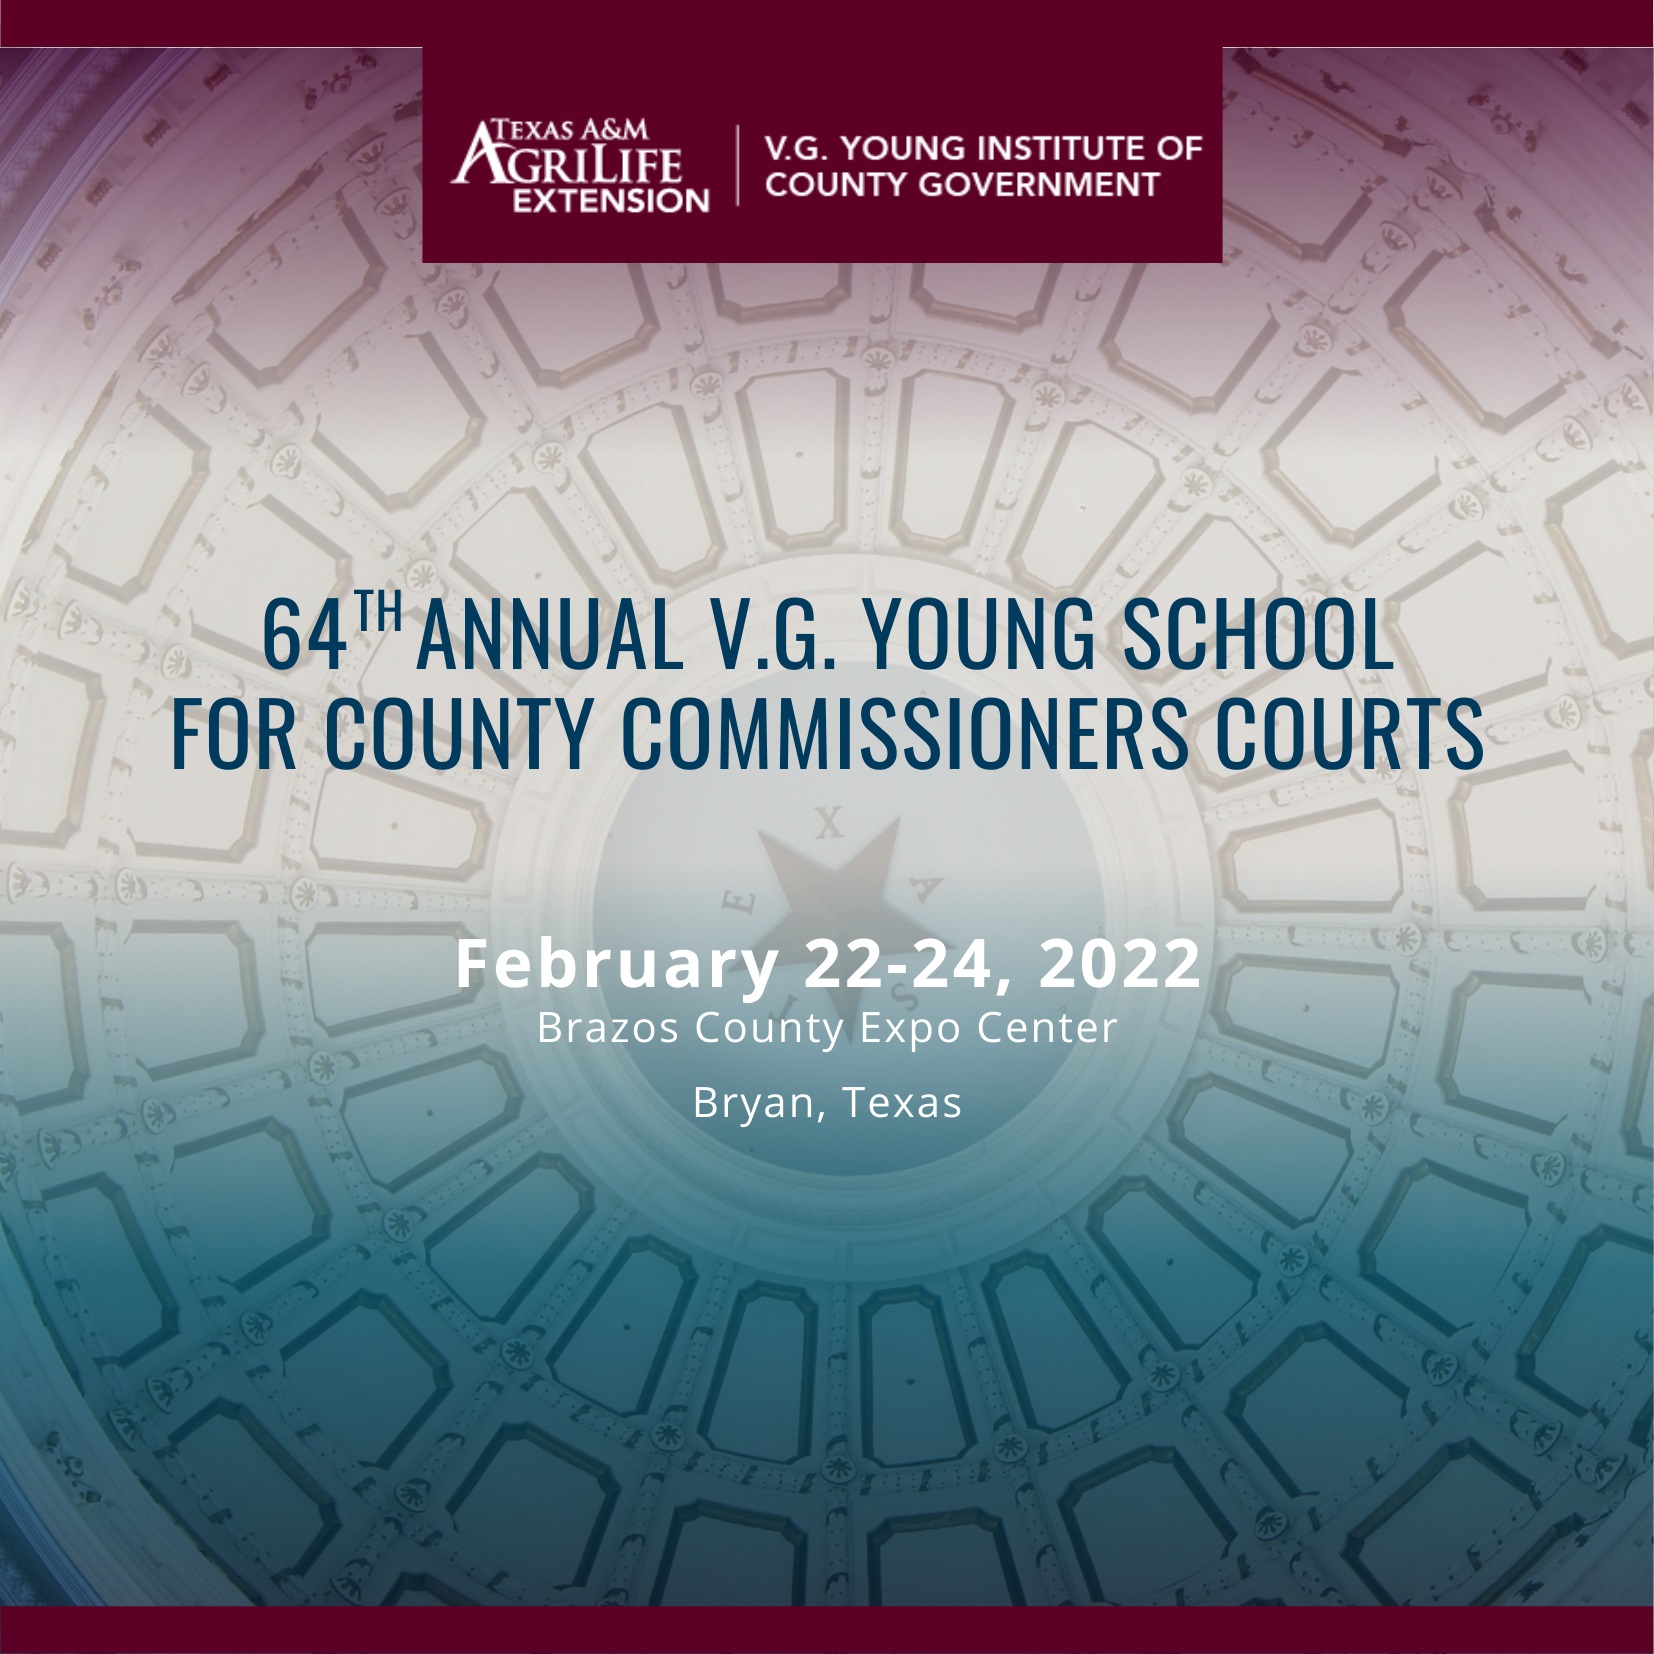 VGYI School for County Commissioners Courts